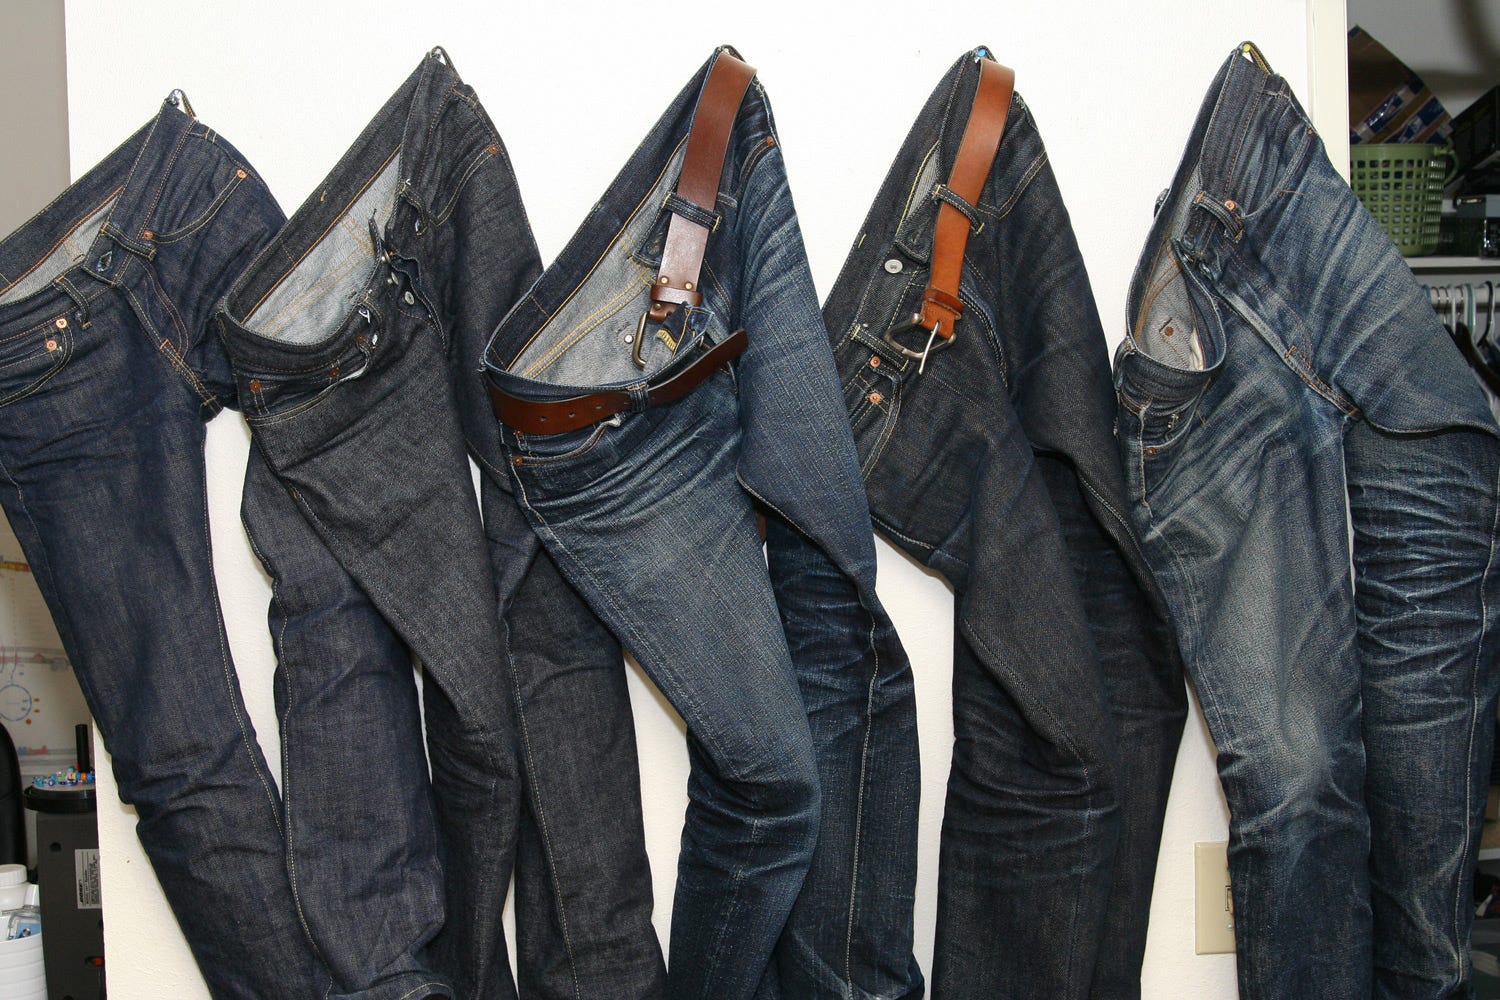 urban clothing brand that specializes in untreated denim